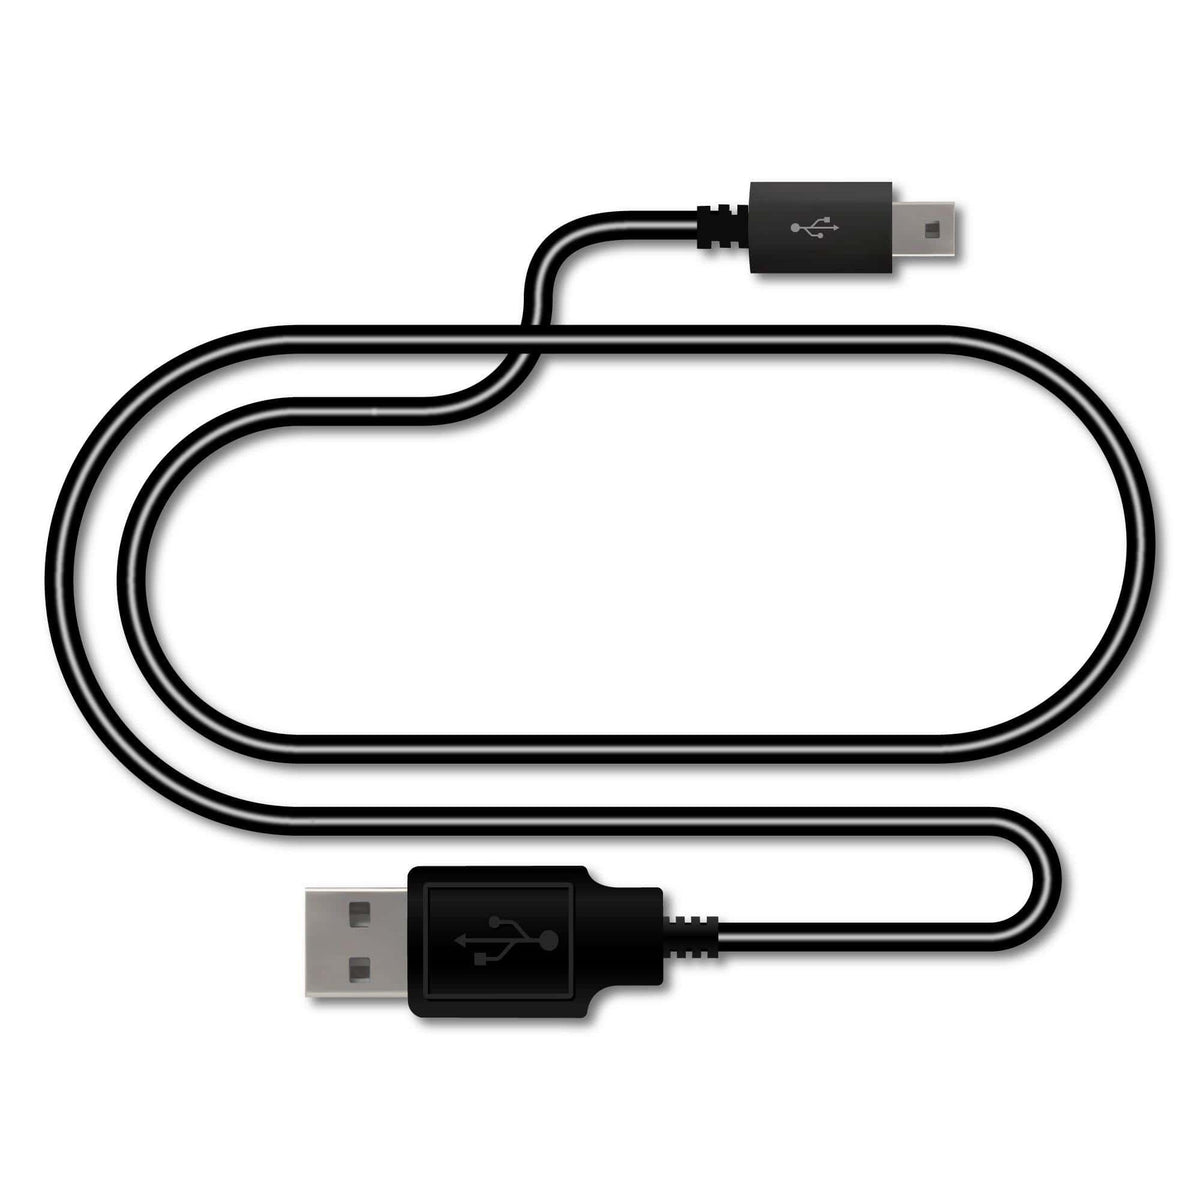 Rove Ultimate 2.5ft Mini-USB Data Cable for R2-4K Dash Cam | Check Compatibility Image Before Purchasing